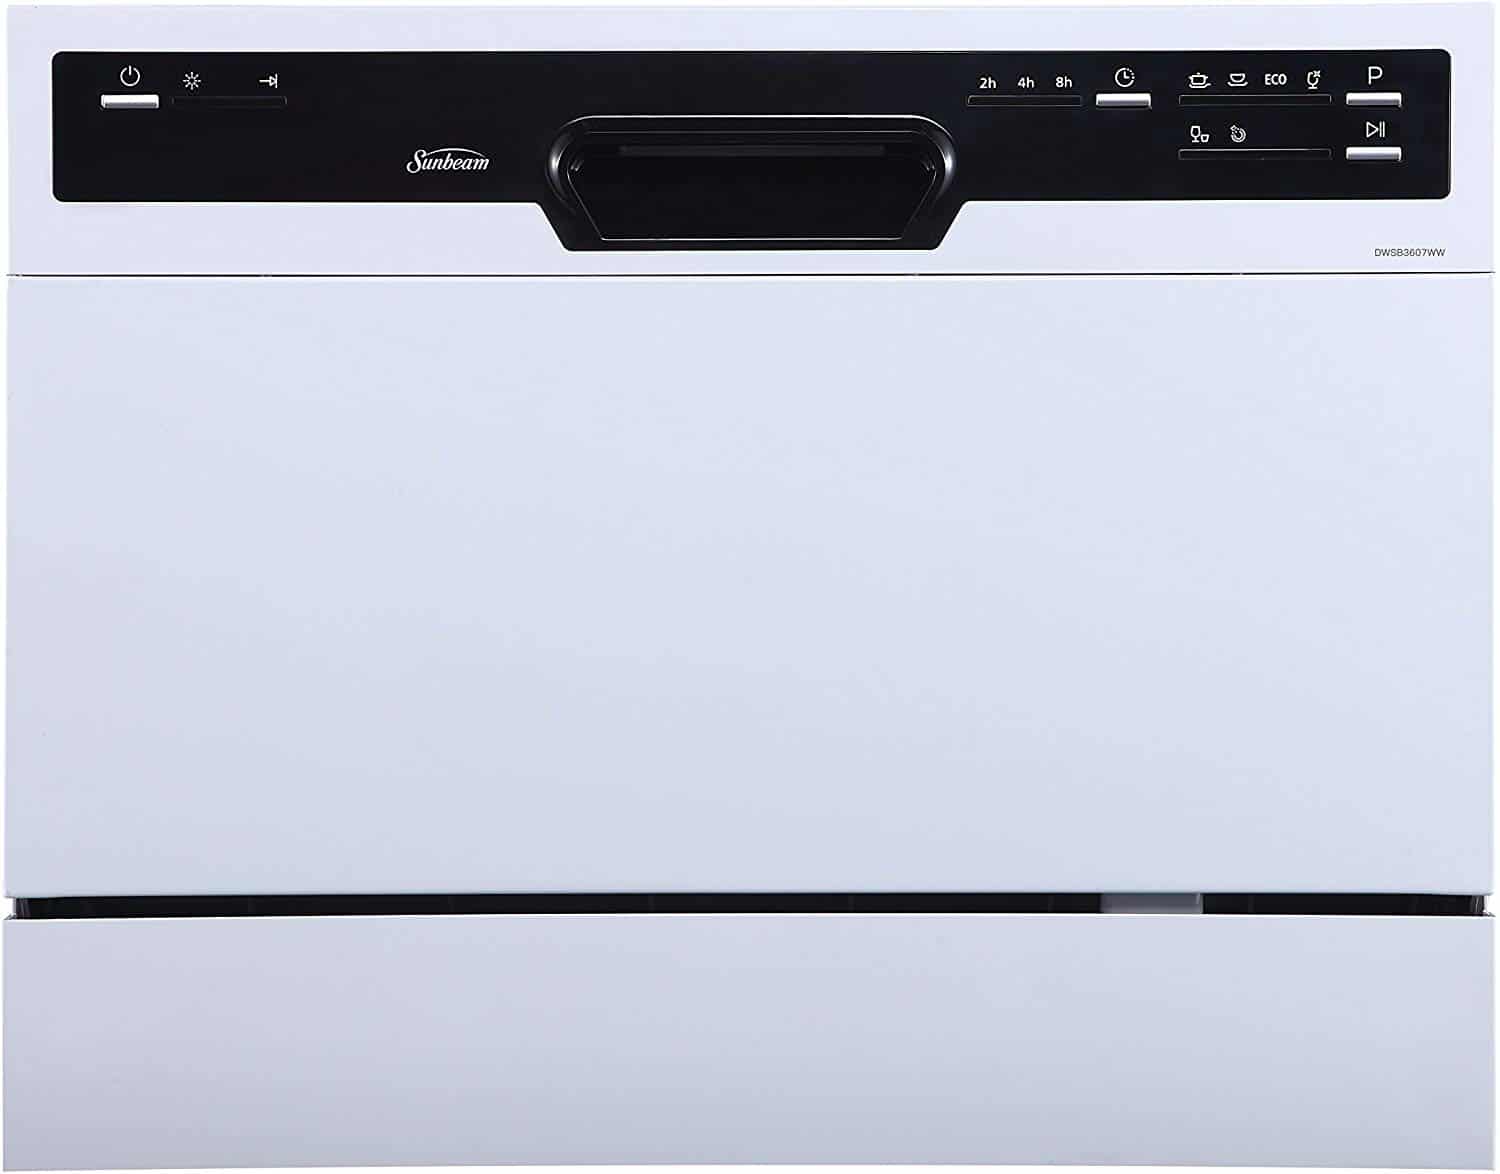 The 10 Best Compact Dishwashers of 2020